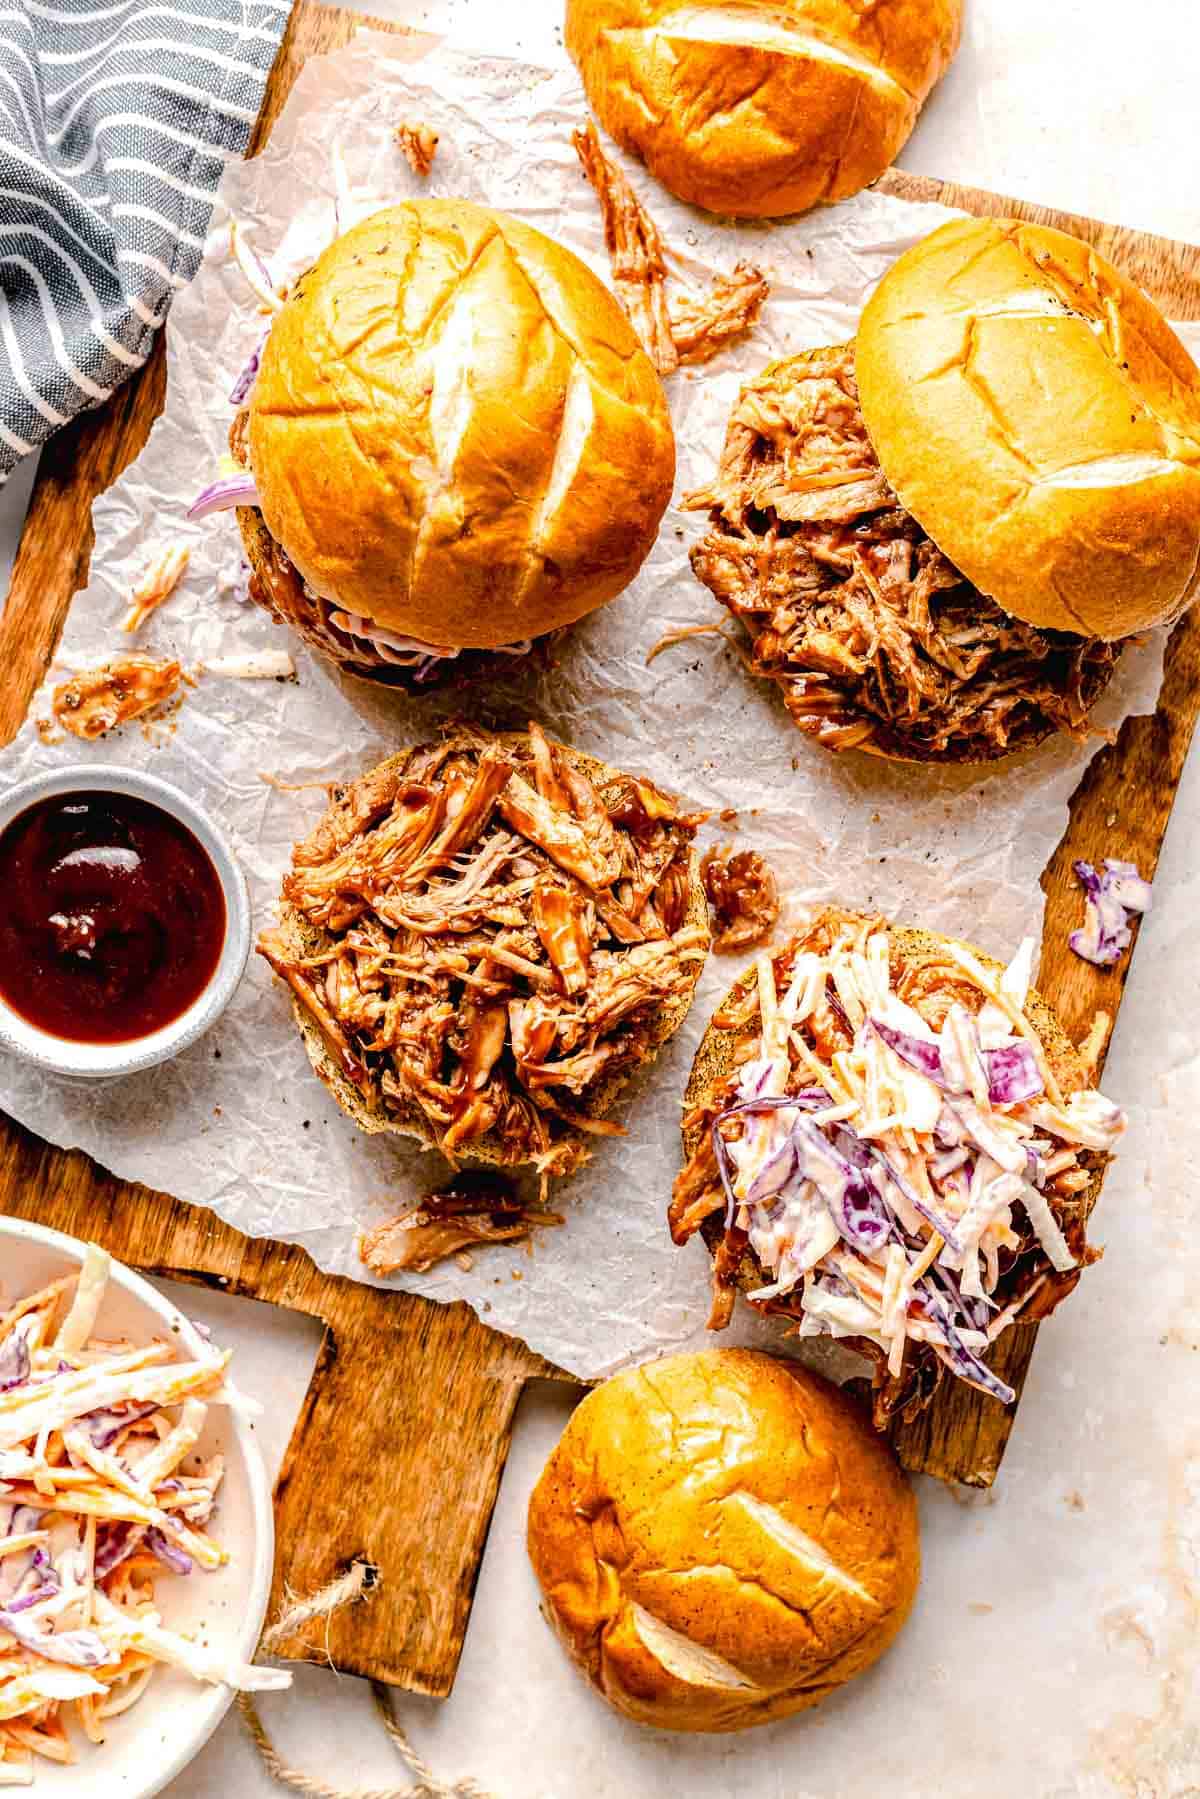 Overhead image of BBQ pork sliders on a serving board. One is open so you can see the pulled pork inside.